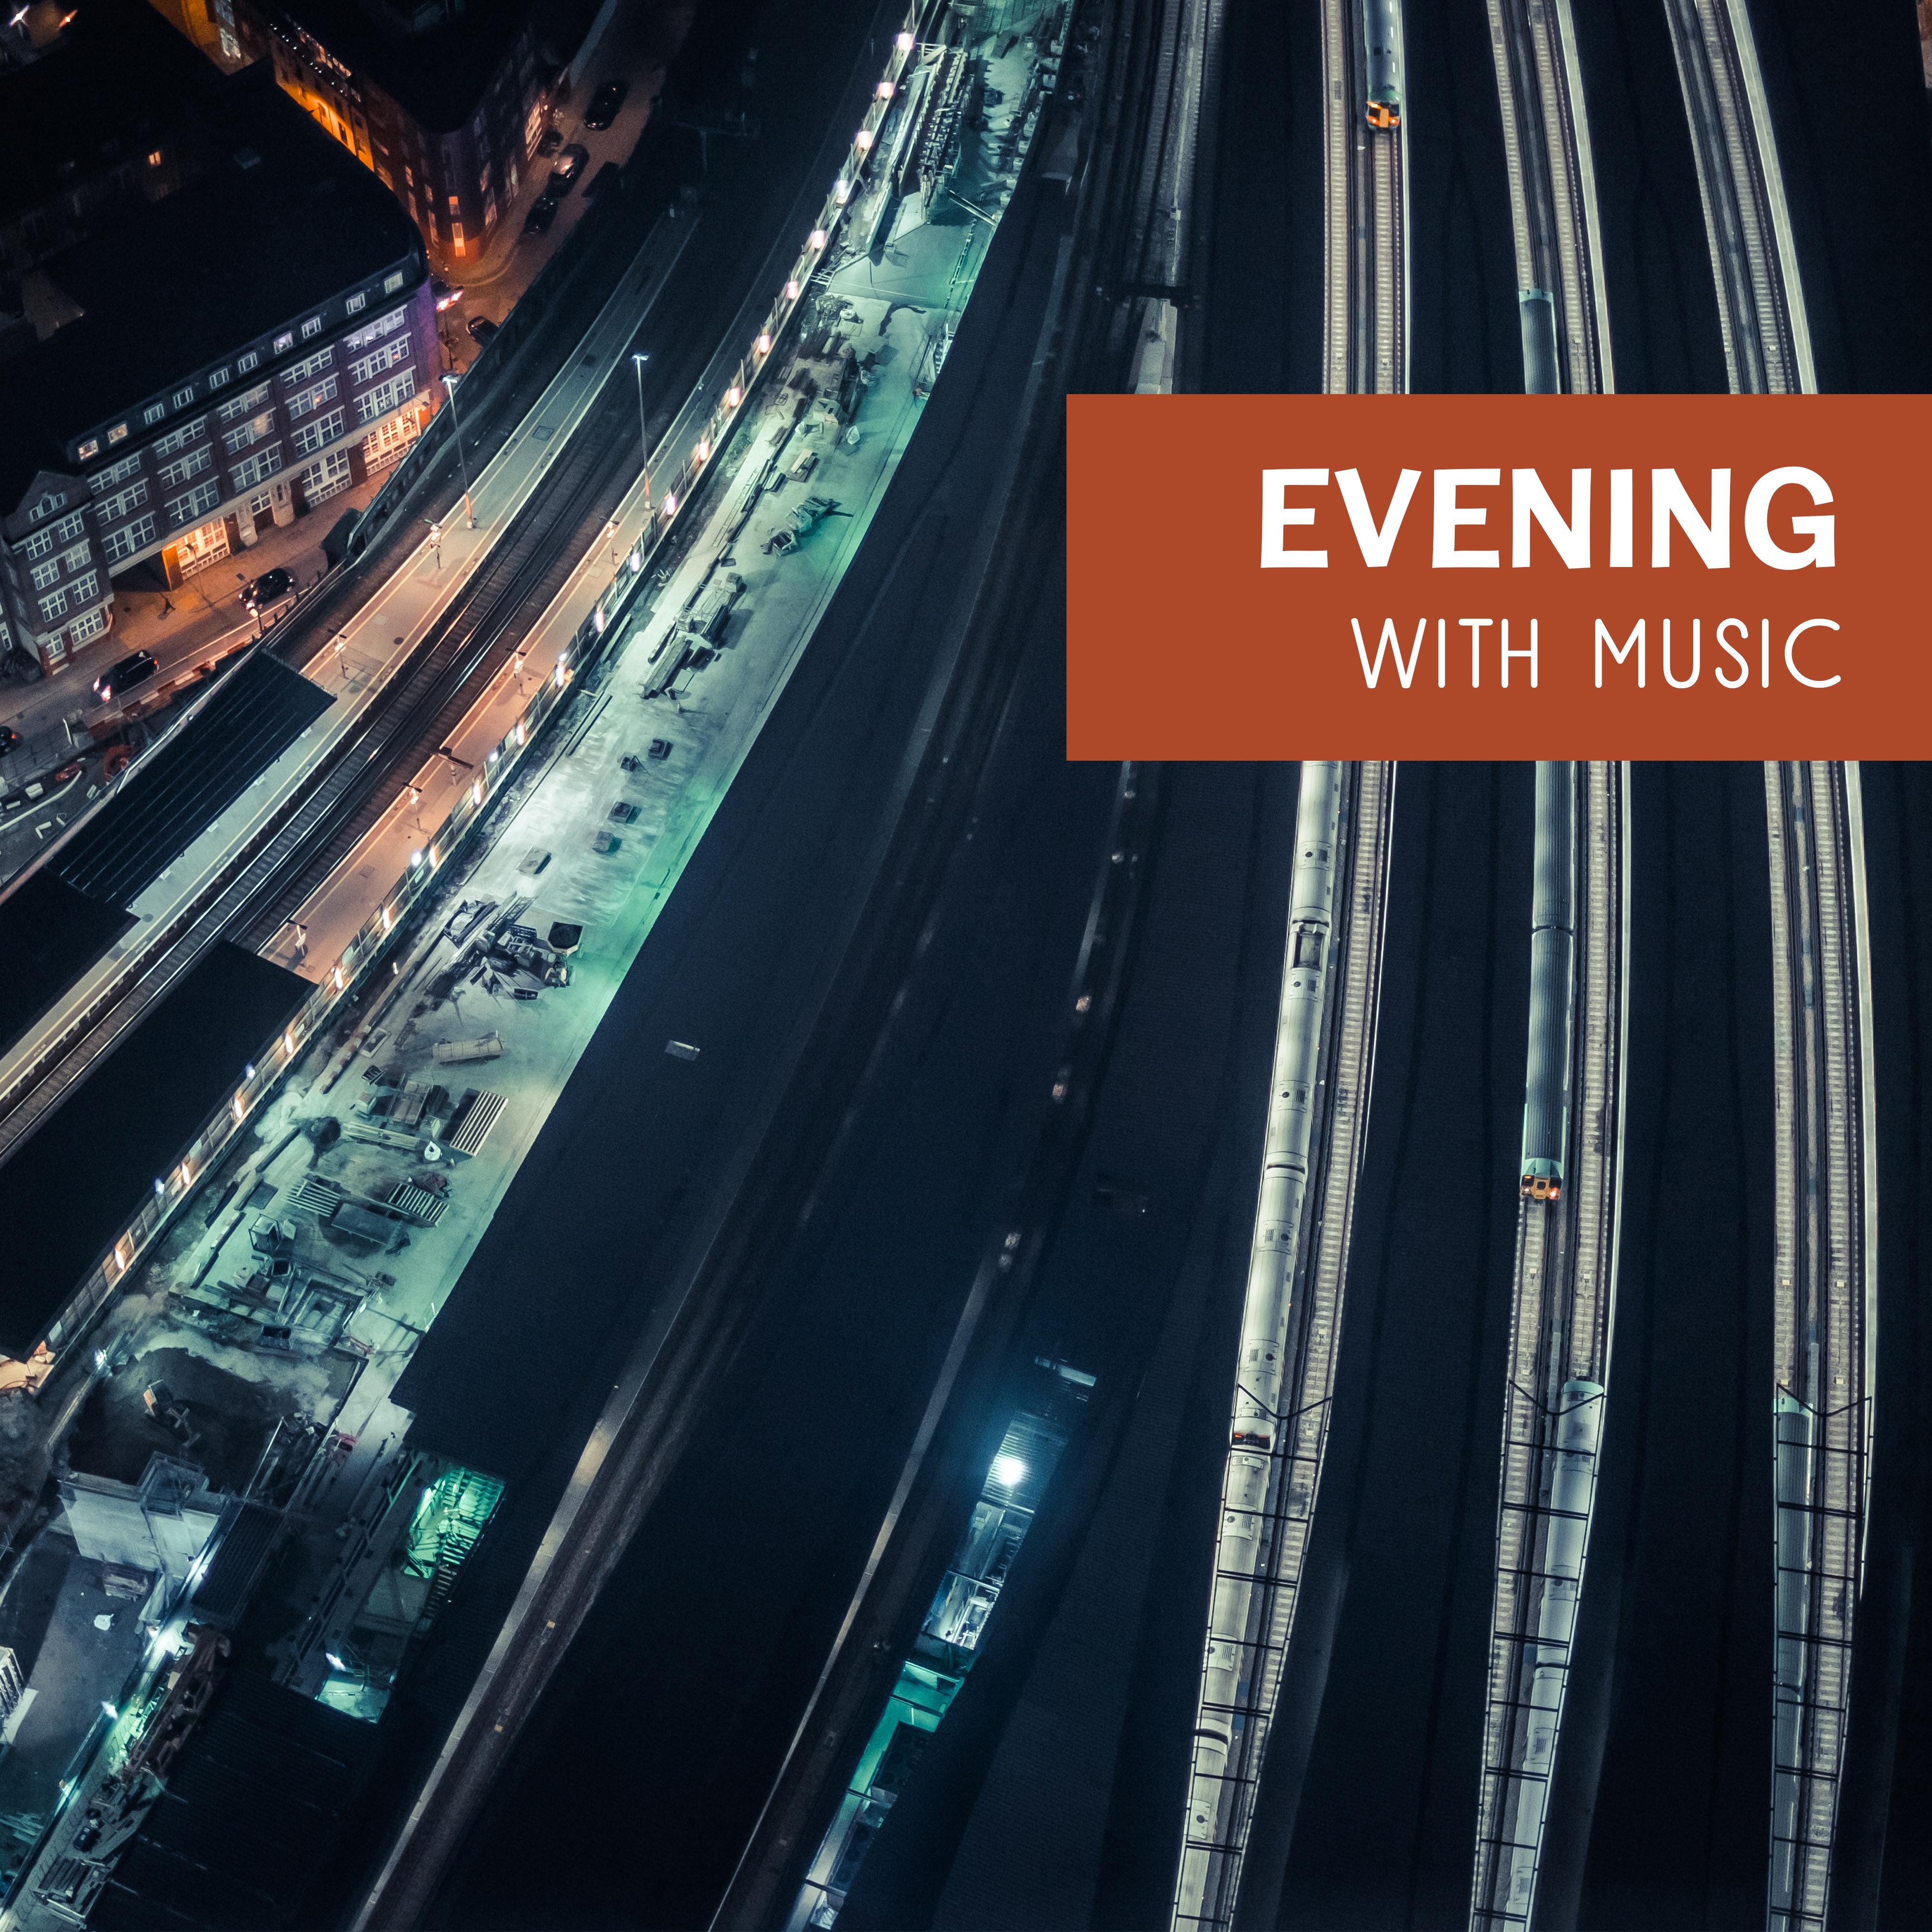 Evening with Music – Chilled Jazz, Instrumental Songs at Night, Relaxation, Best Smooth Jazz, Soothing Guitar, Rest